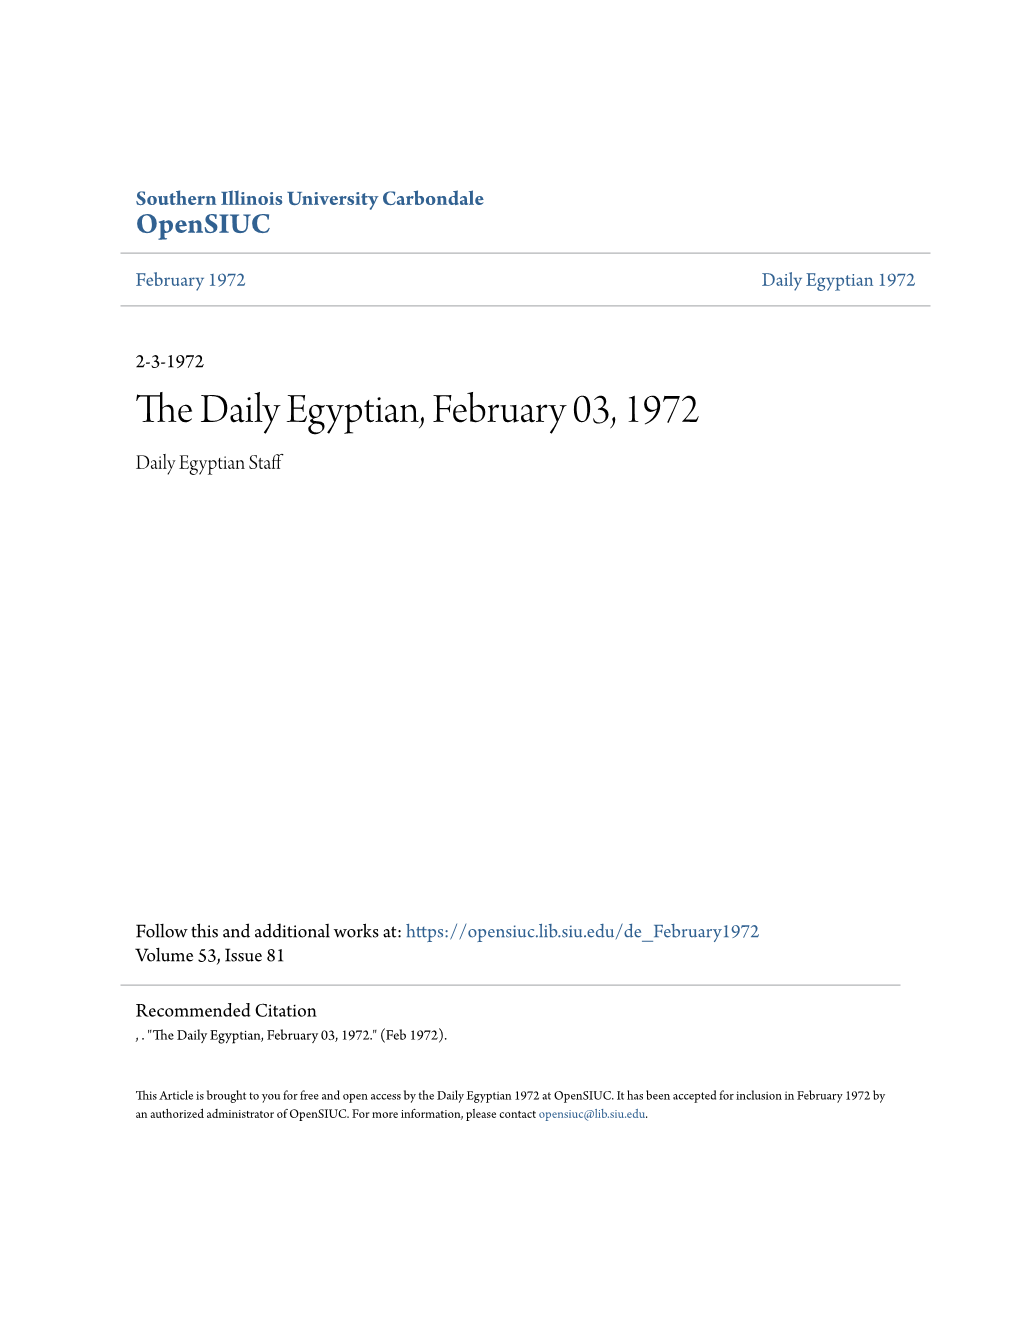 The Daily Egyptian, February 03, 1972